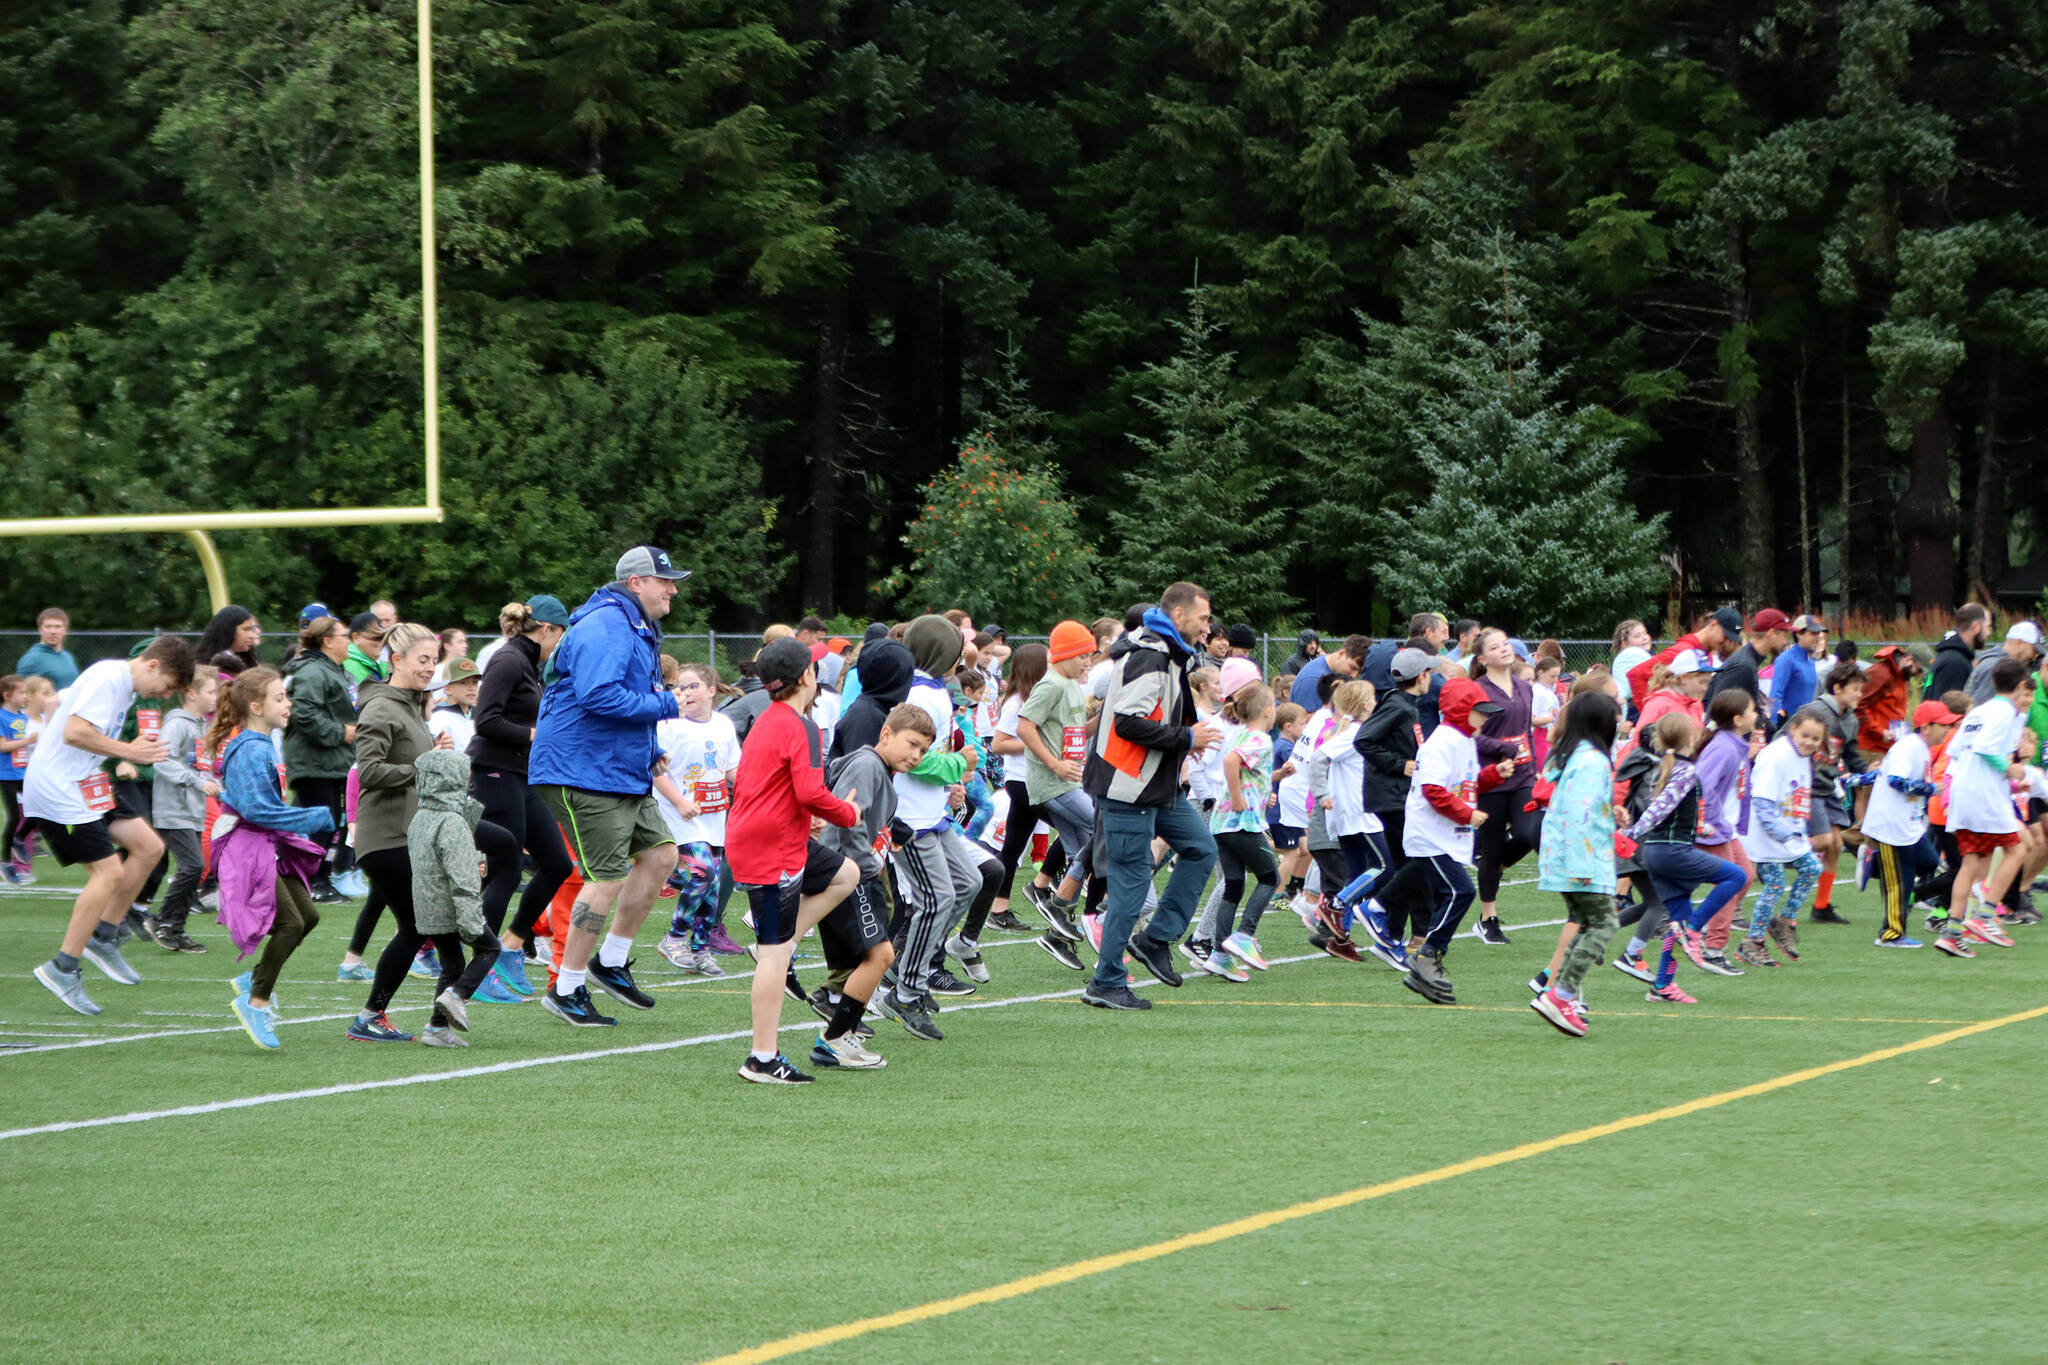 Adults and children take to the field at Thunder Mountain High School to warm up before an Ironkids Fun Run. (Ben Hohenstatt / Juneau Empire)